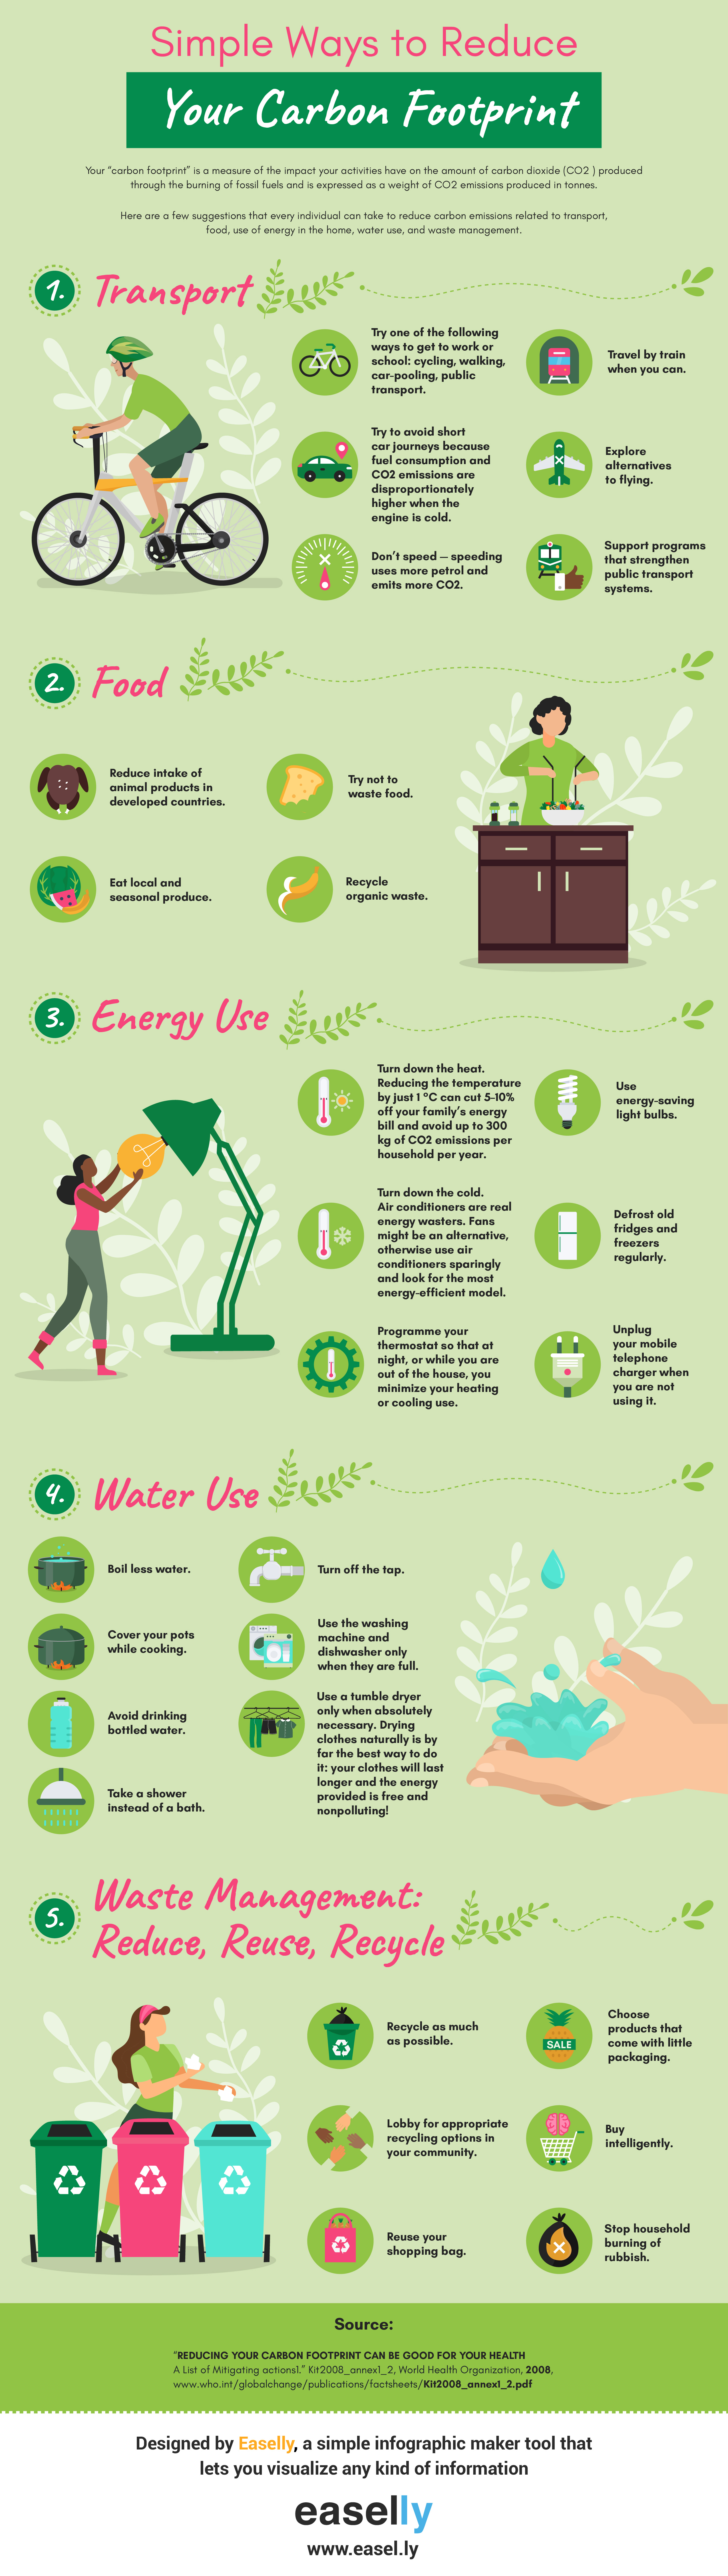 Simple ways to reduce your carbon footprint infographic